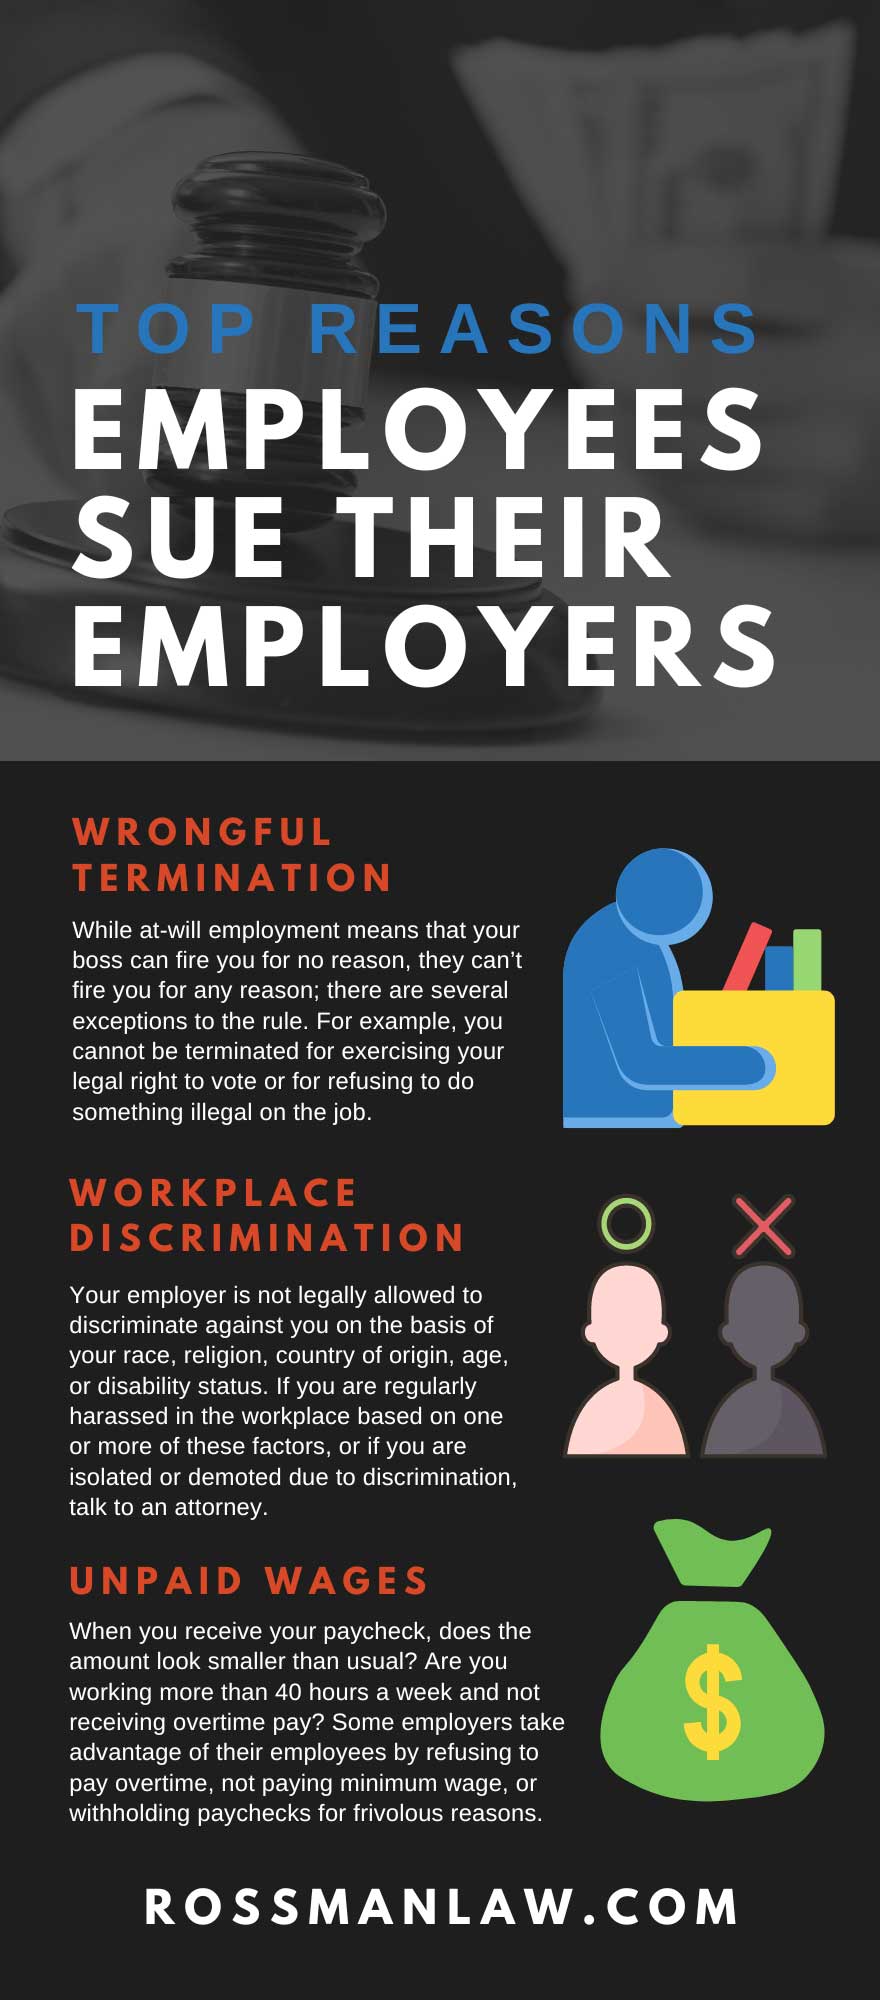 Top 10 Reasons Employees Sue Their Employers